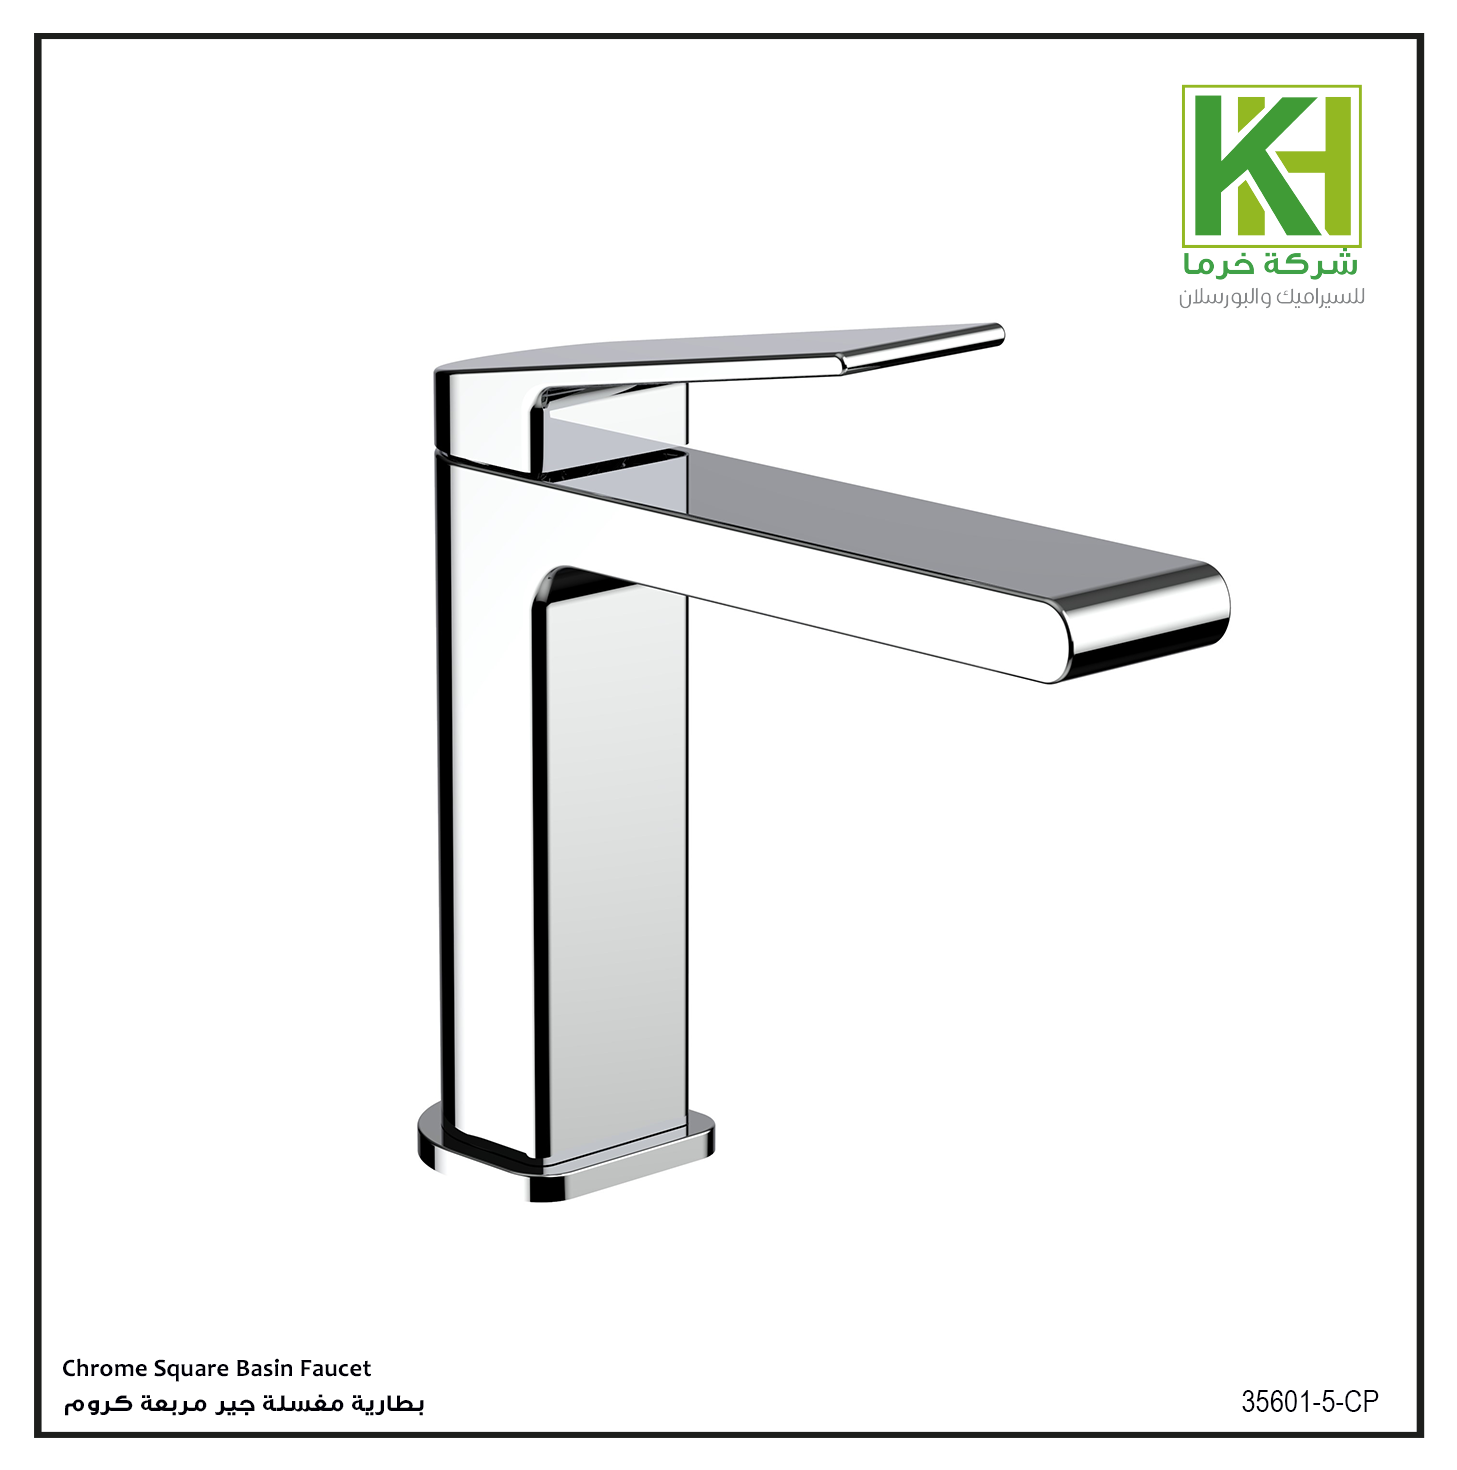 Picture of Chrome Square Basin Faucet